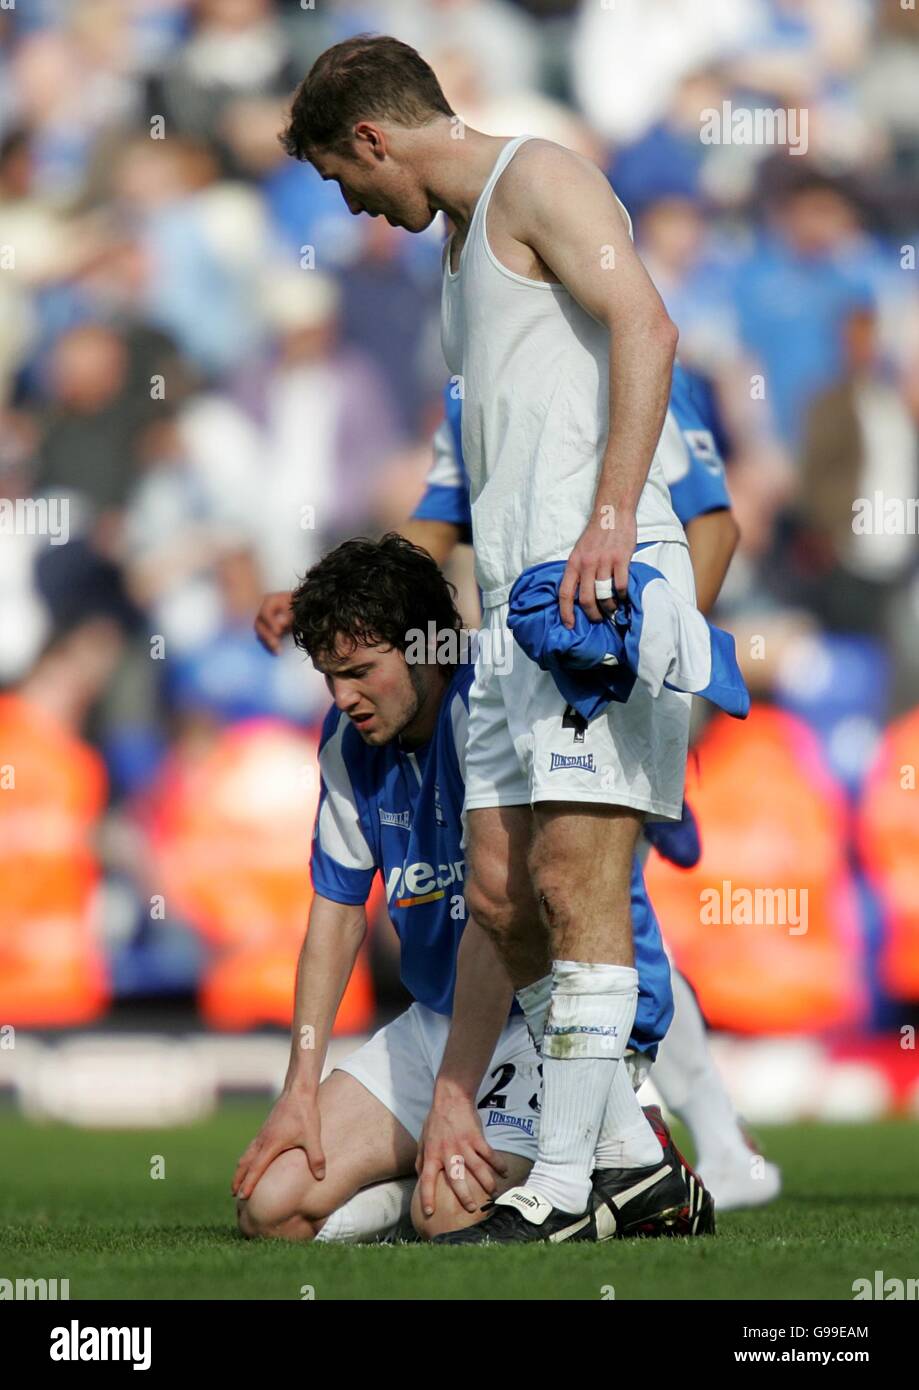 Soccer - FA Barclays Premiership - Birmingham City v Newcastle United - St Andrews. Birmingham City's Mathew Sadler (on ground) after defeat to Newcastle meant relegation from the Premiership Stock Photo